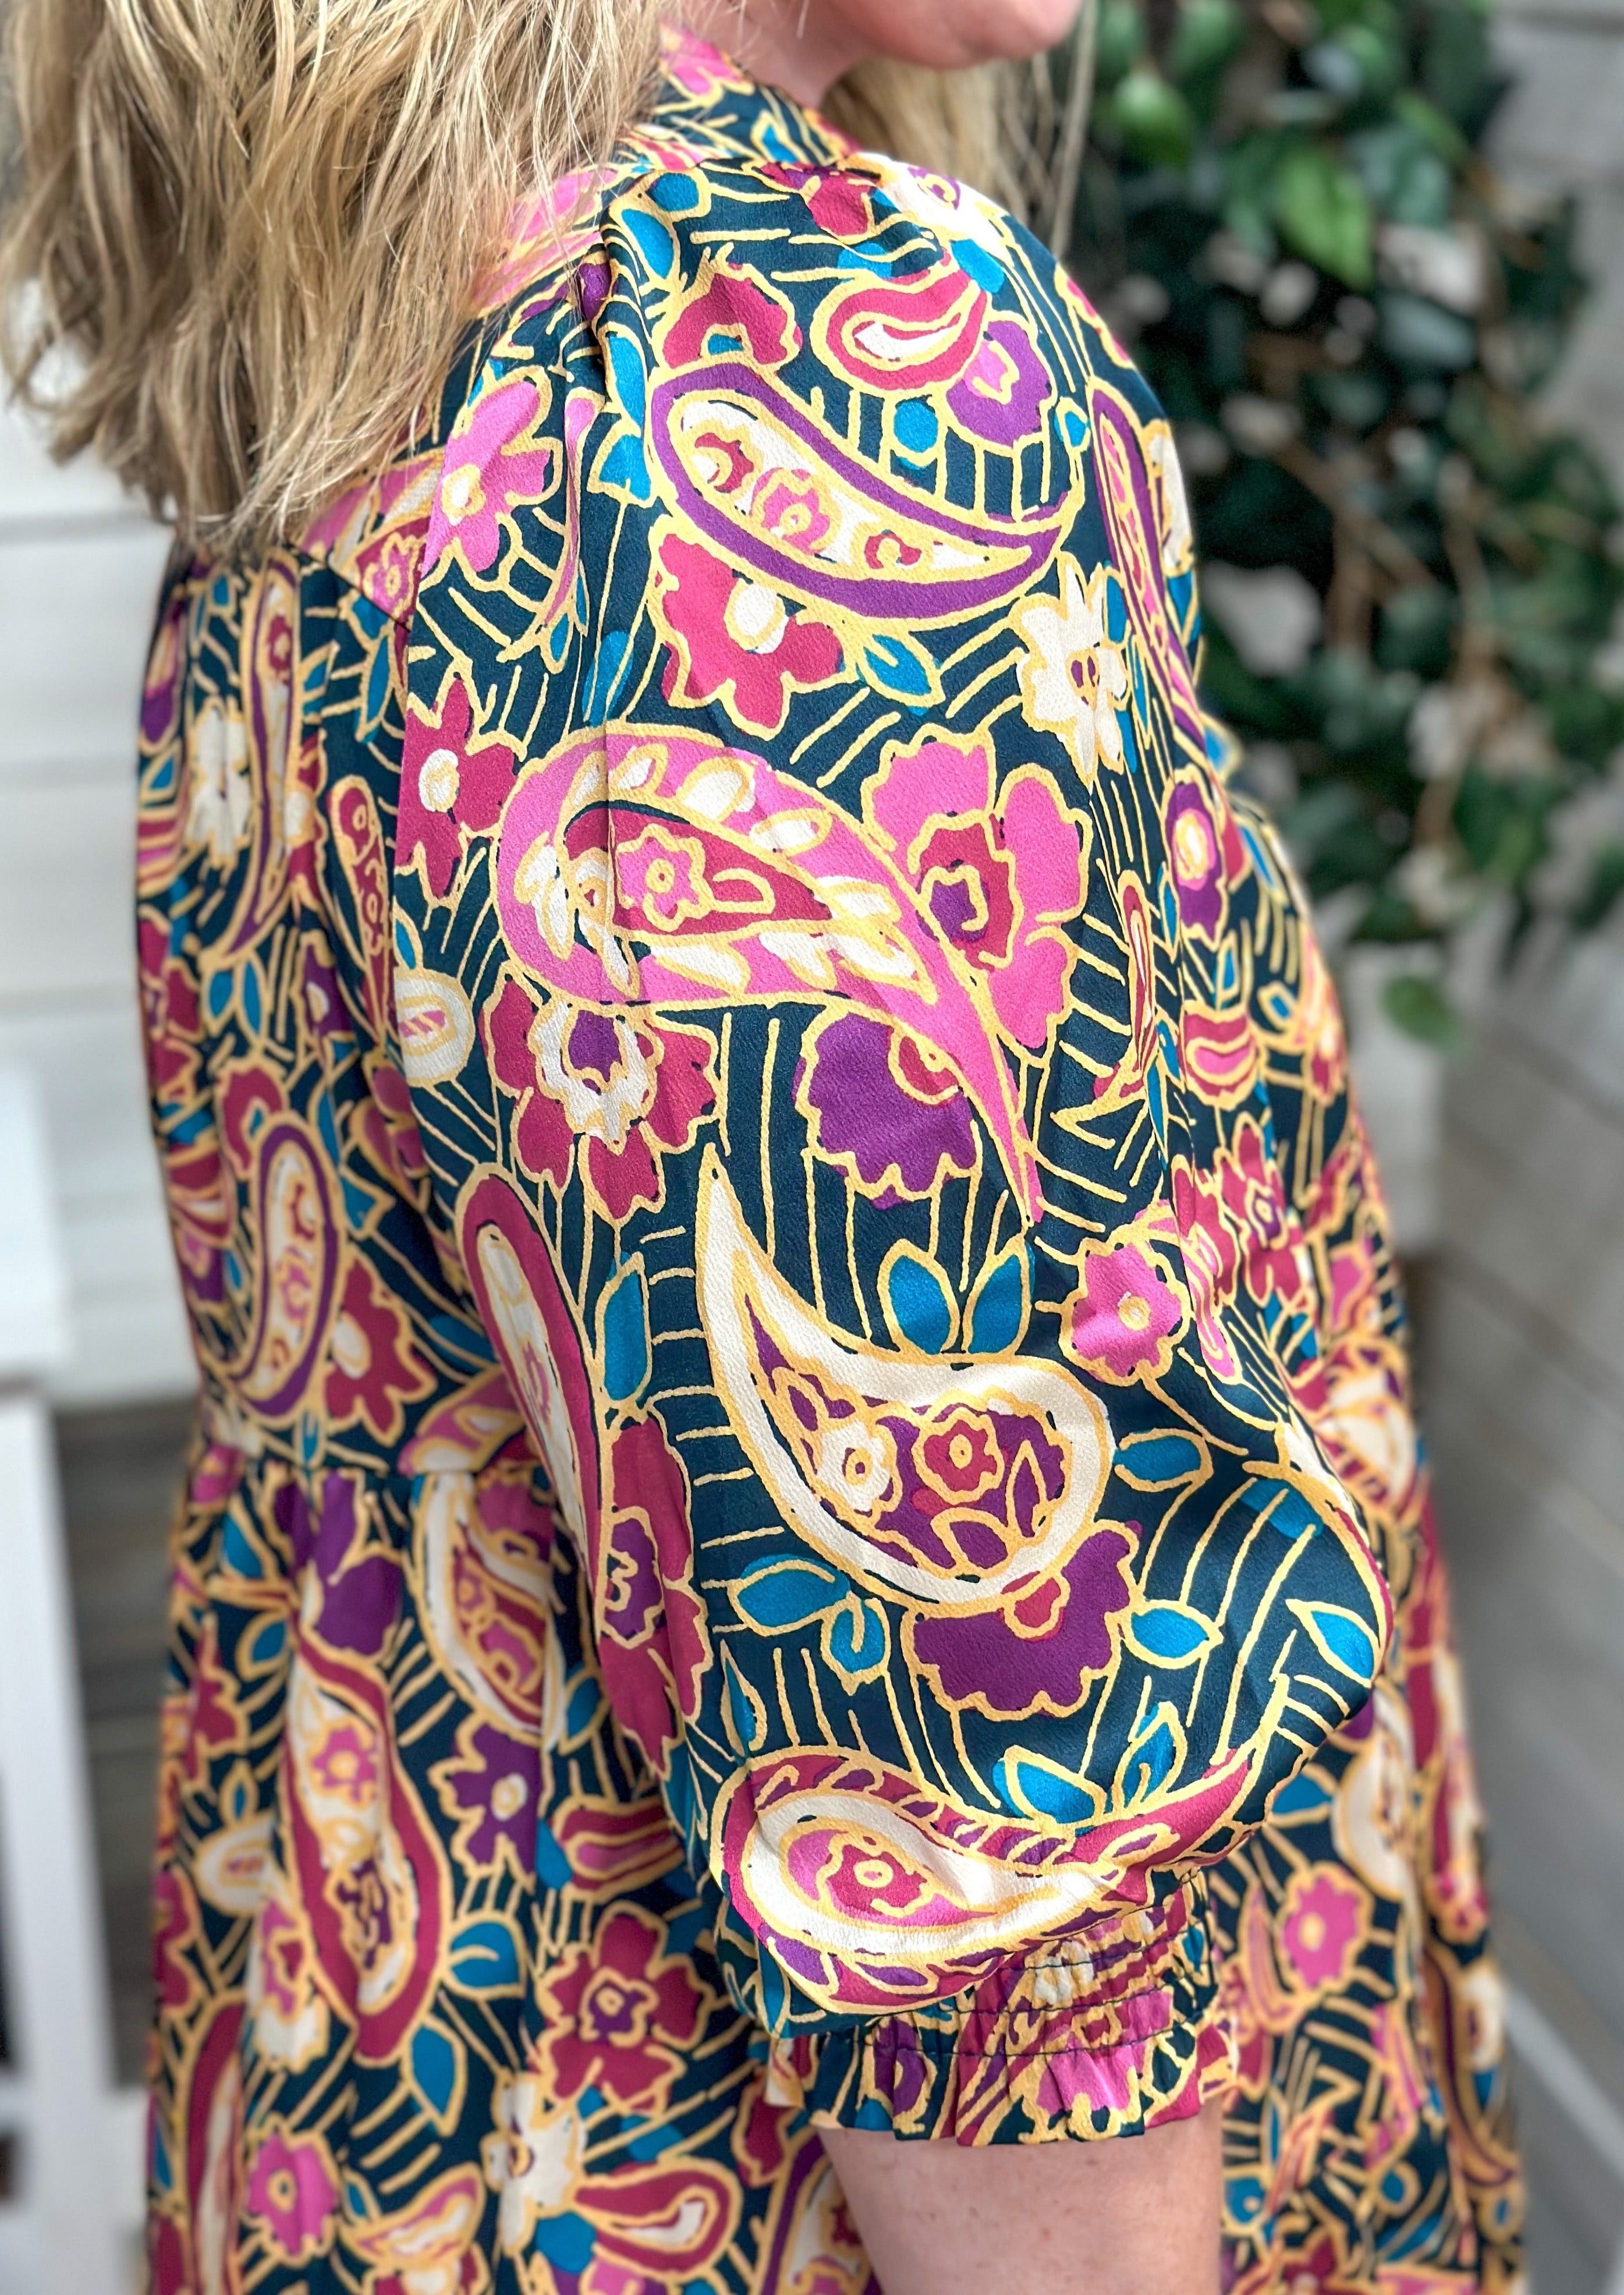 Paisley & Floral Tiered Midi Dress - dark teal/green background - elbow length sleeve with elastic banding - creams/pinks/blues/greans in the floral and paisley design - midi/maxi length - collared neck